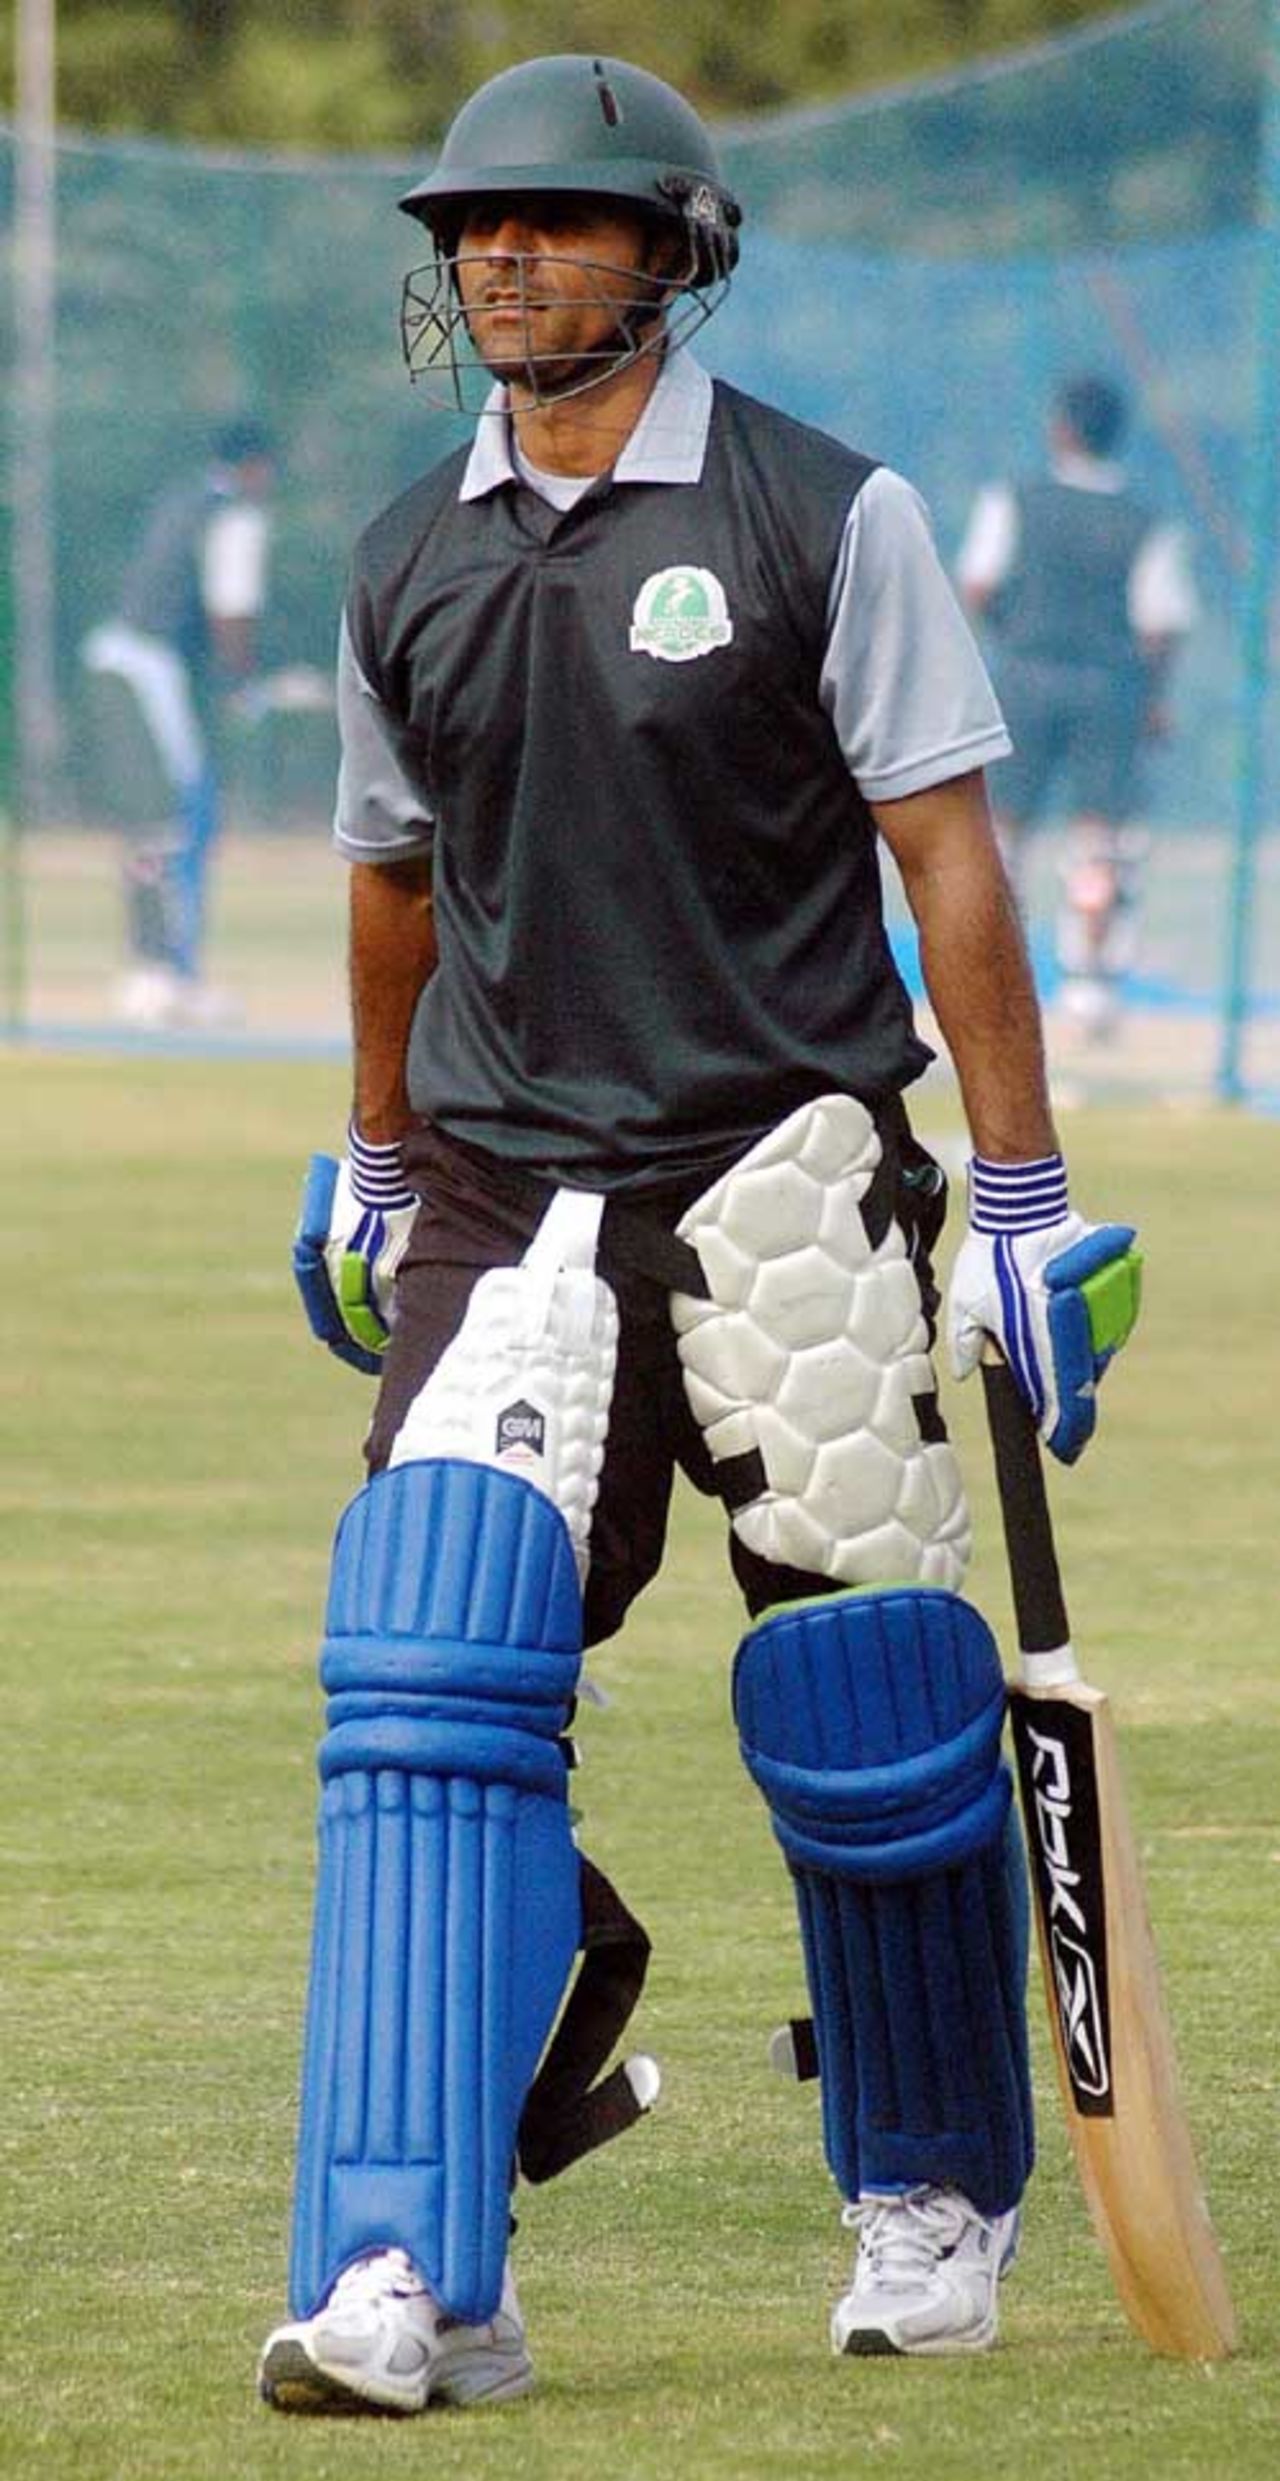 Abdul Razzaq pads up to bat at an ICL training camp in a resort near Hyderabad, November 20, 2007